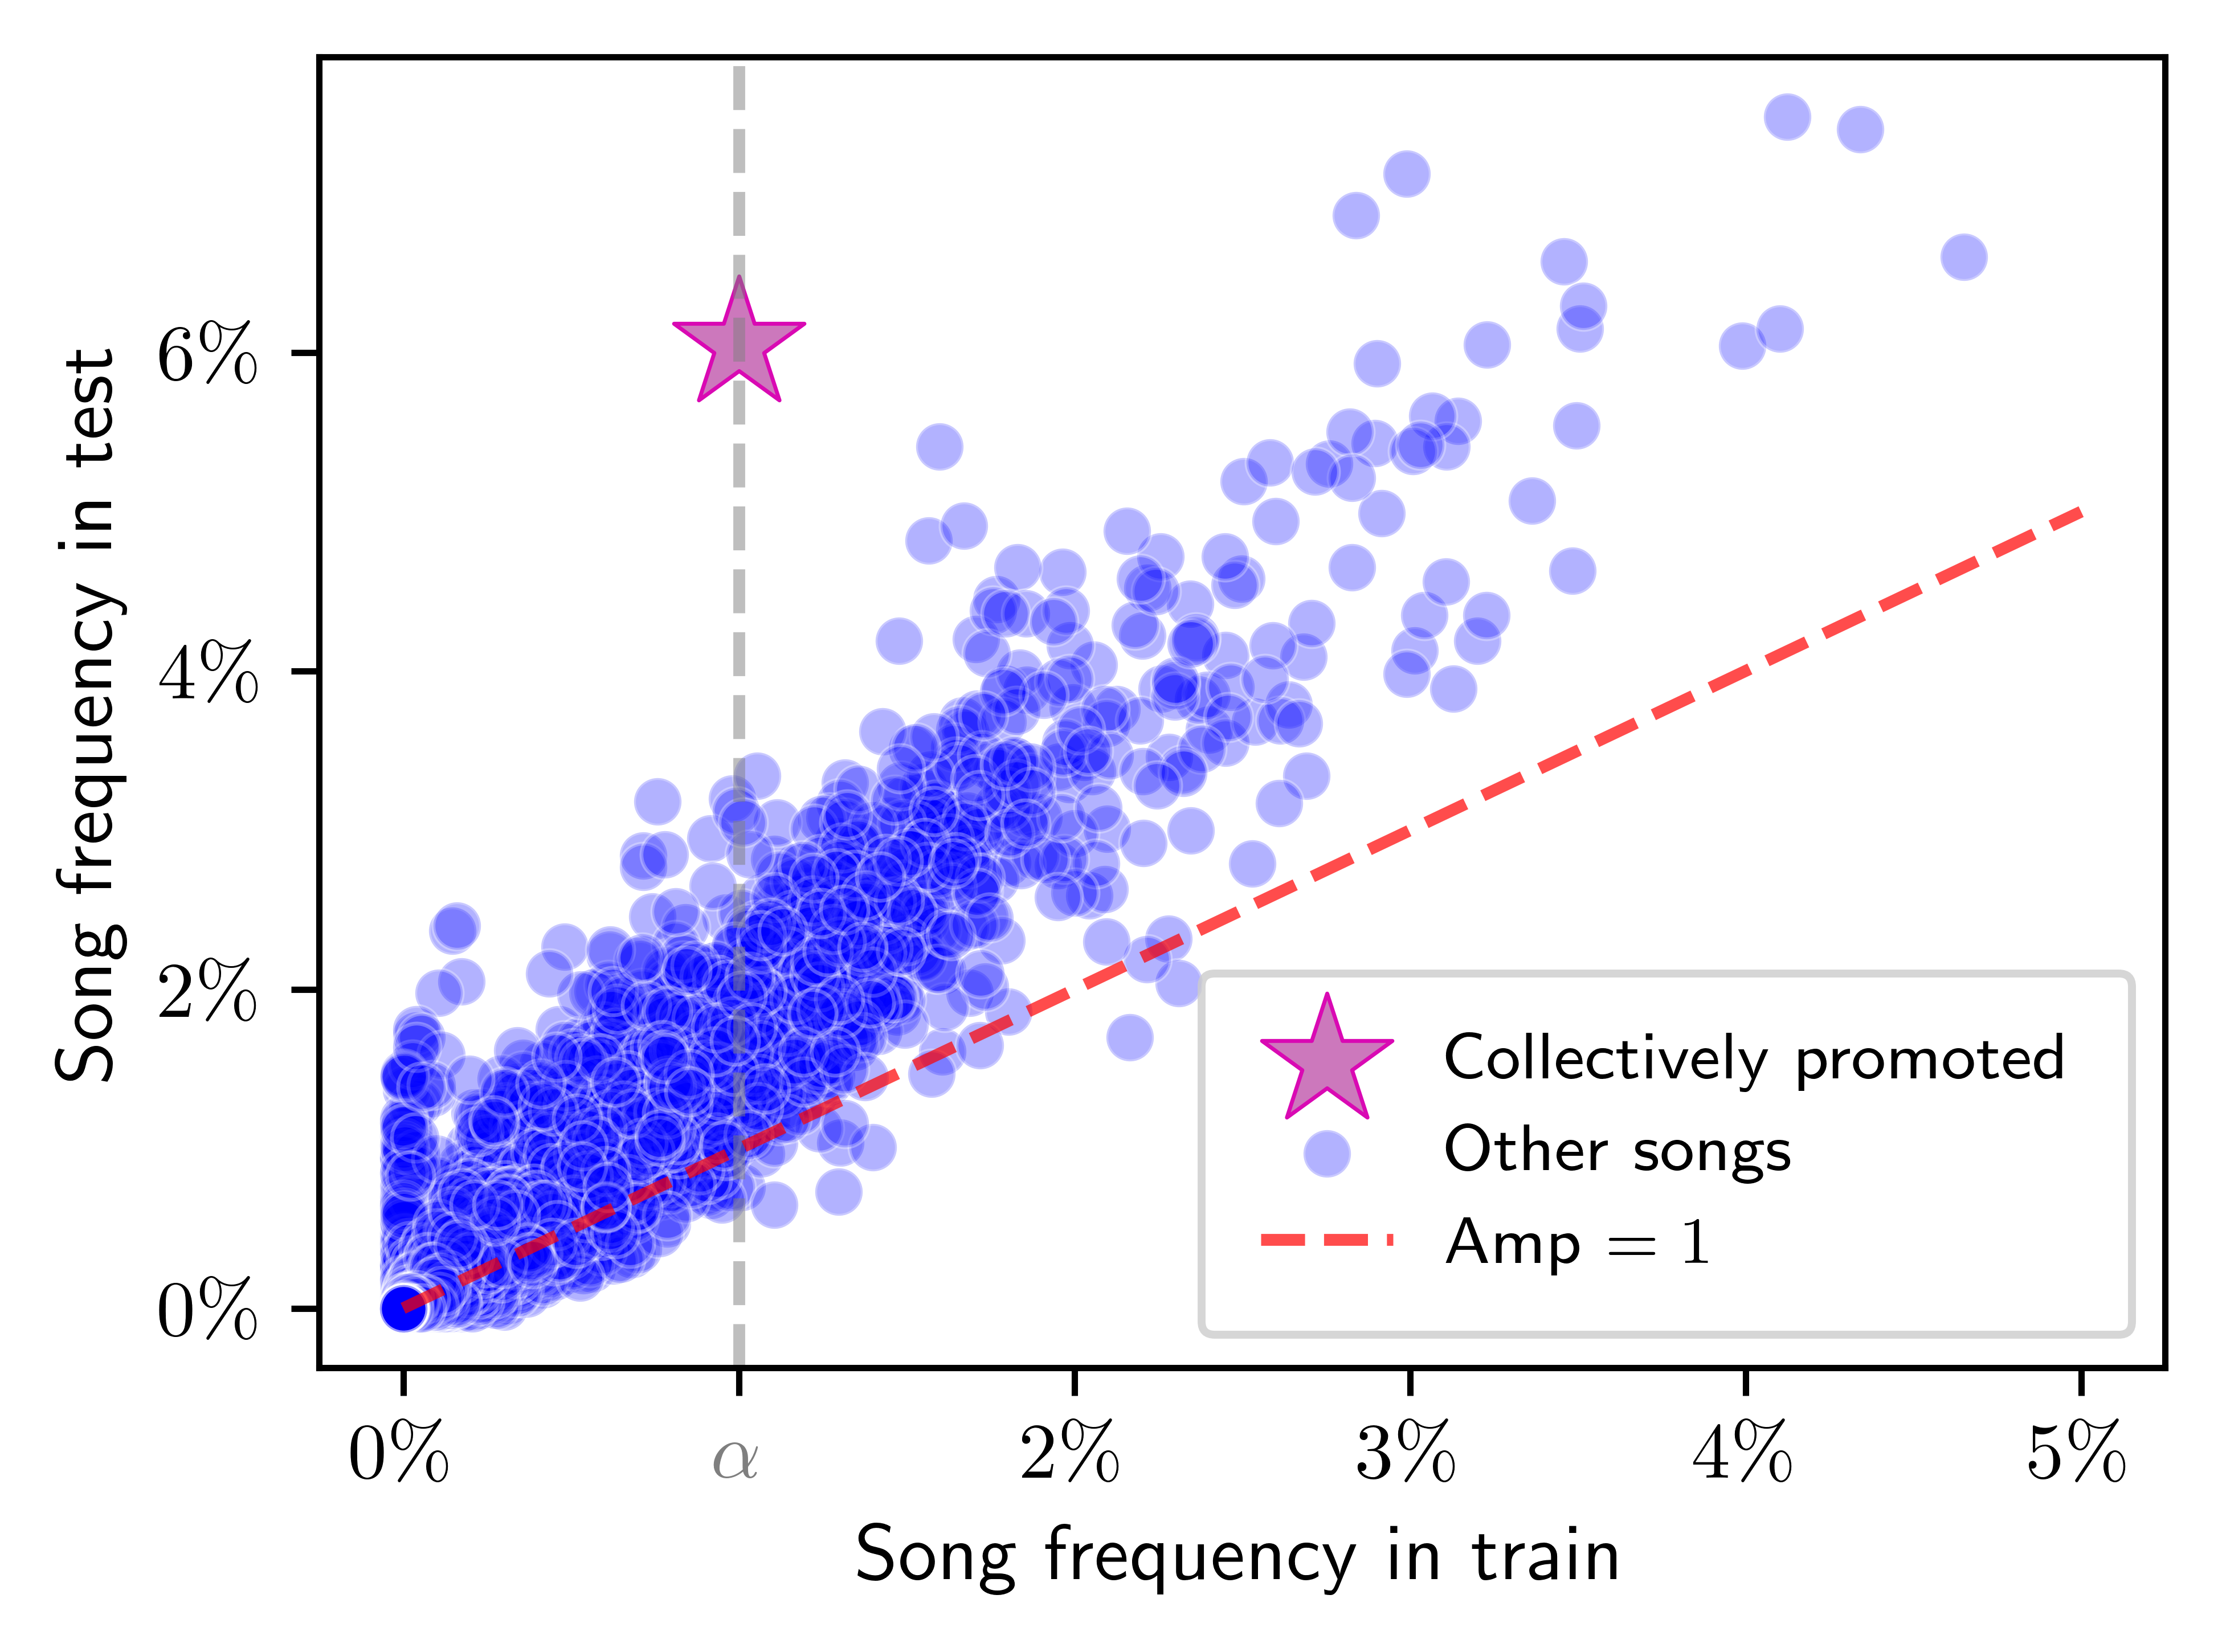 Algorithmic Collective Action in Recommender Systems: Promoting Songs by Reordering Playlists